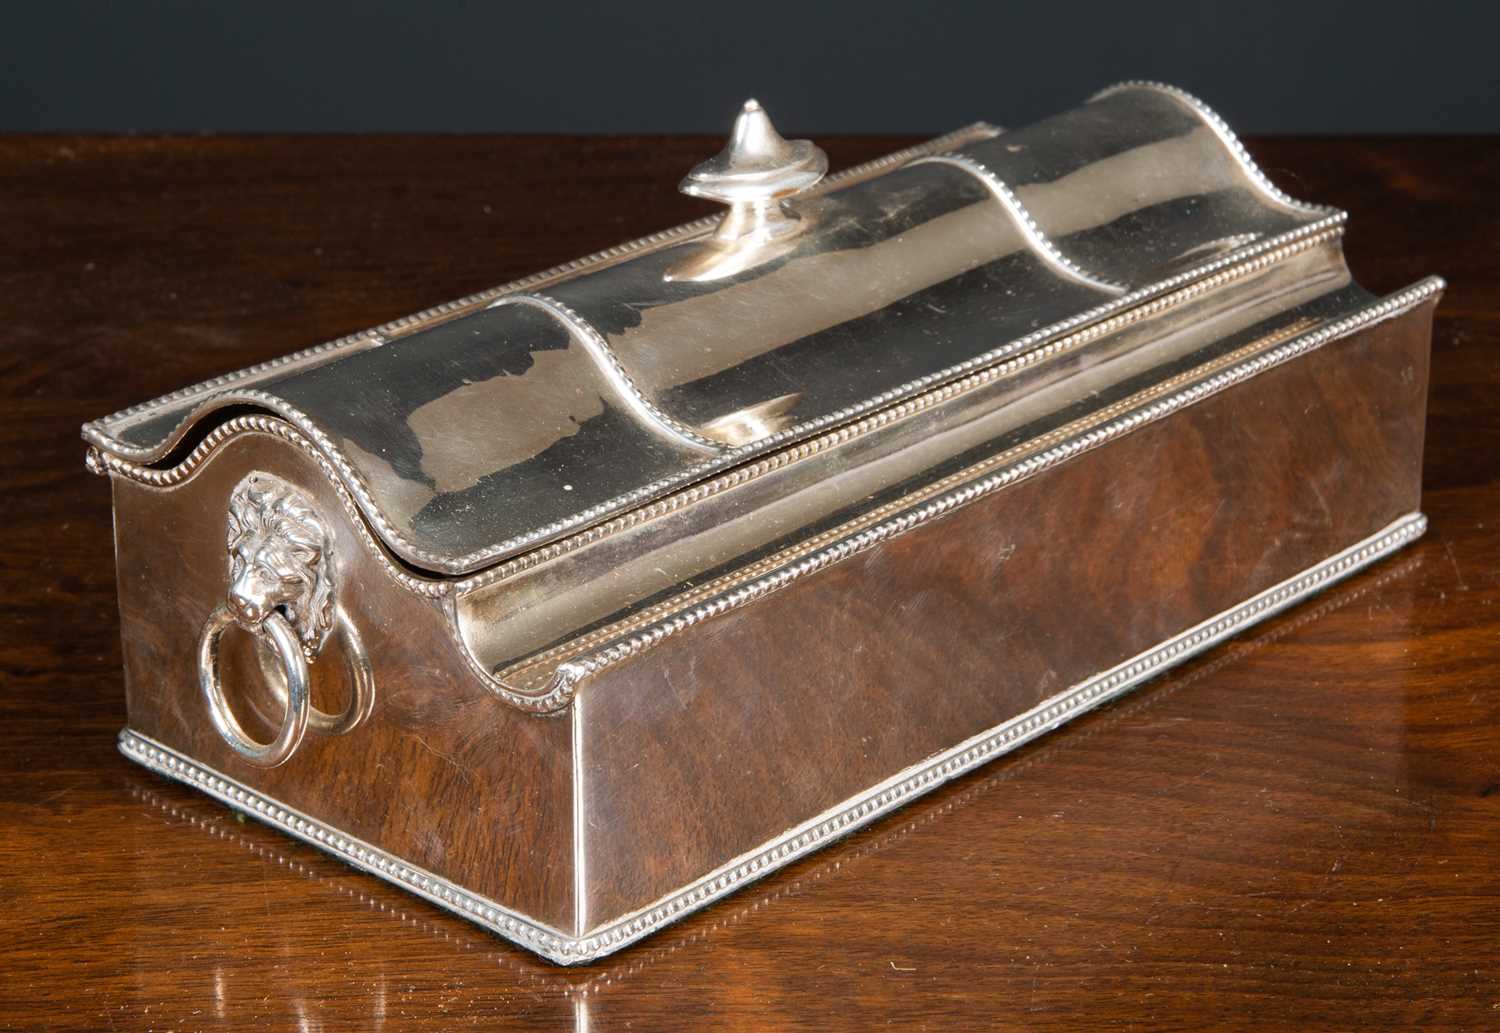 A 19th century silver plated casket form desk stand, containing two cut glass and silver plated